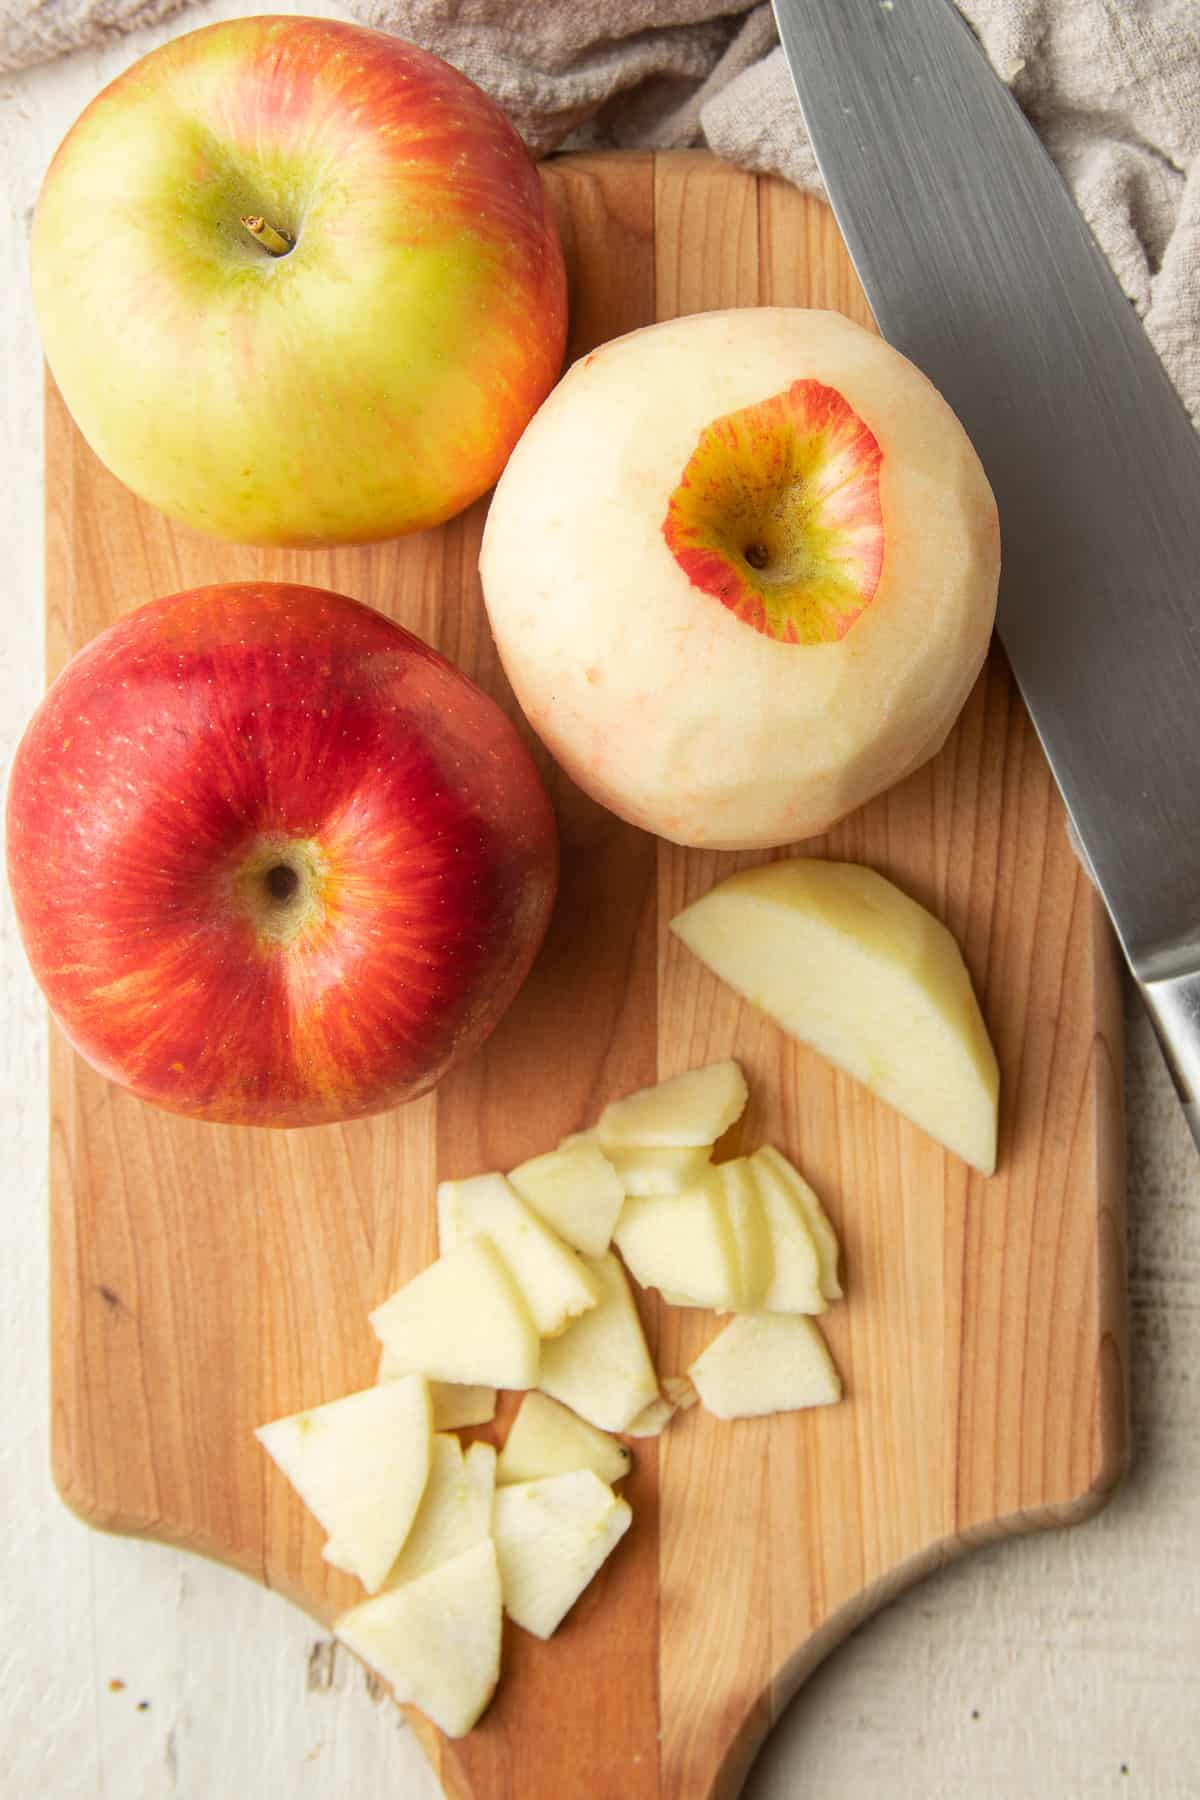 Two whole apples, one peeled apple, and apple slices on a cutting board with knife.